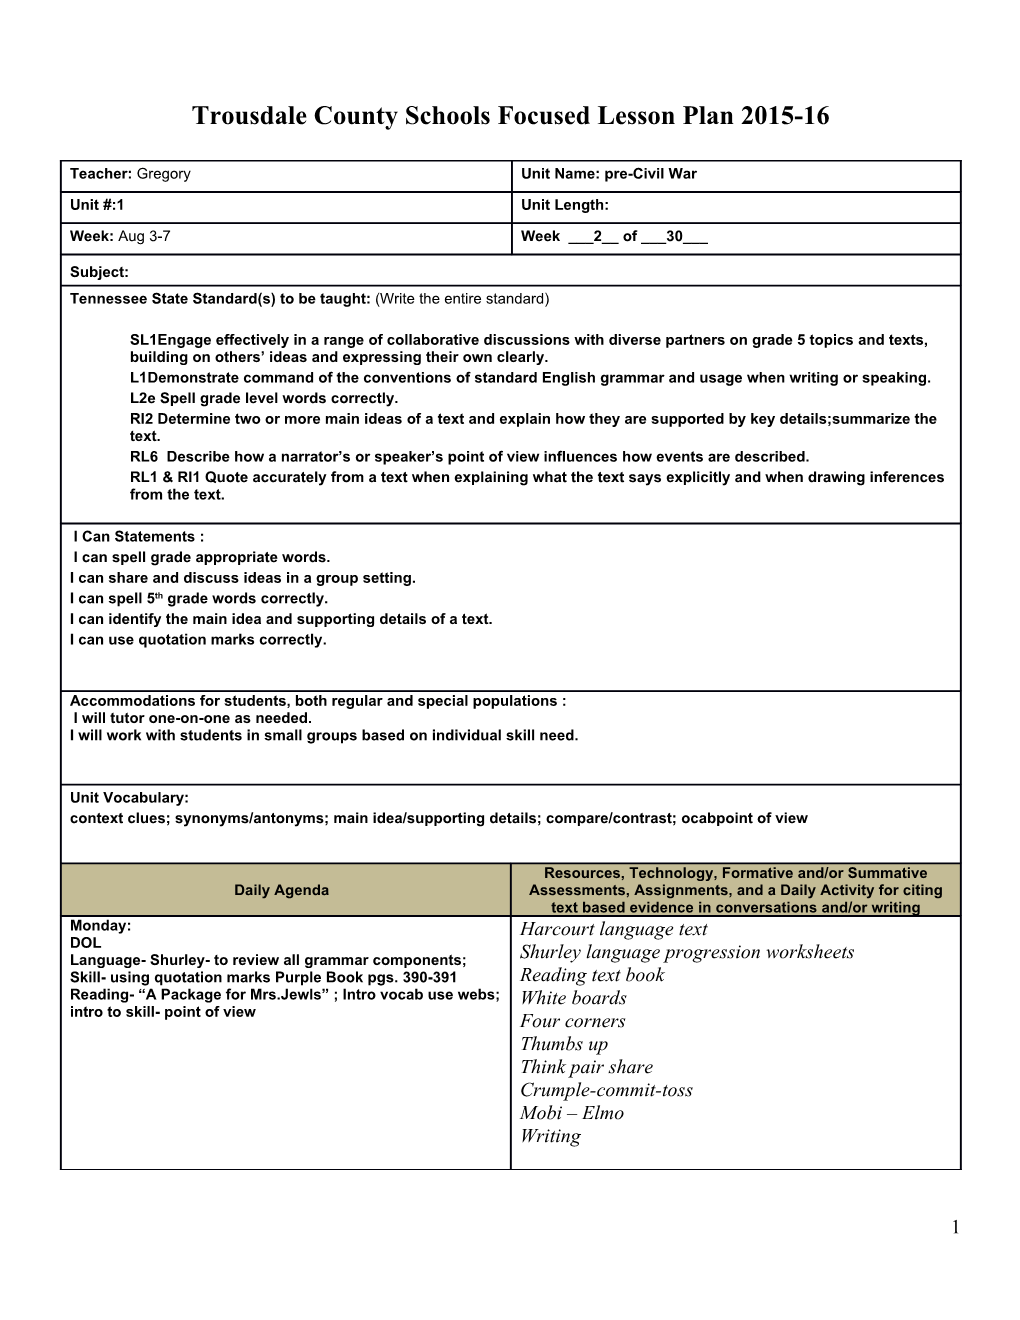 Lesson Plan Template s33